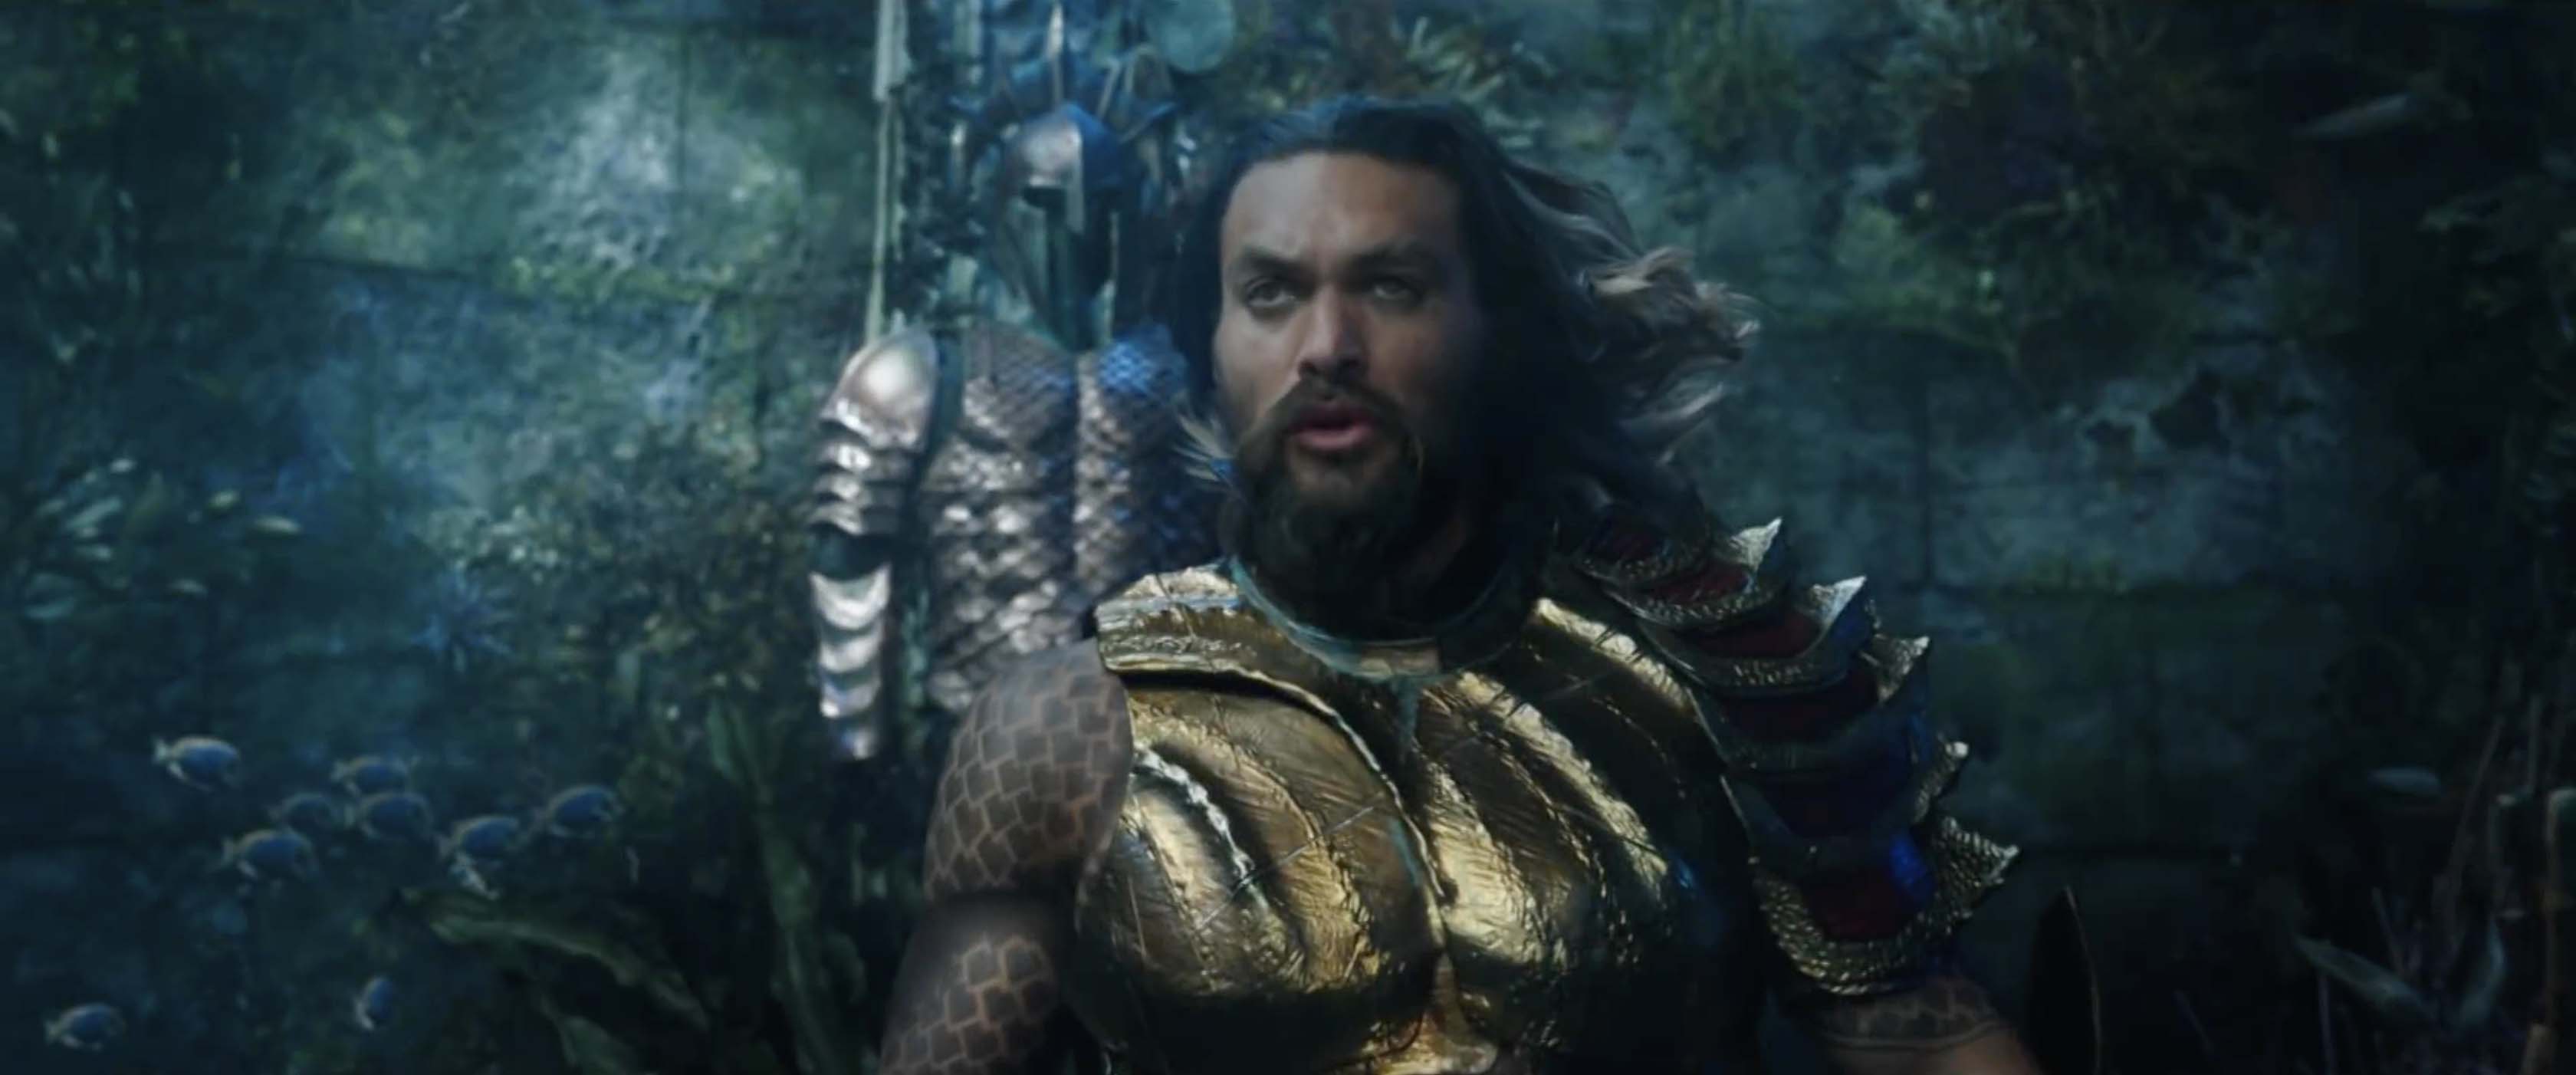 Aquaman Trailer Our First Look At The King Of The Seven Seas The Nerdy